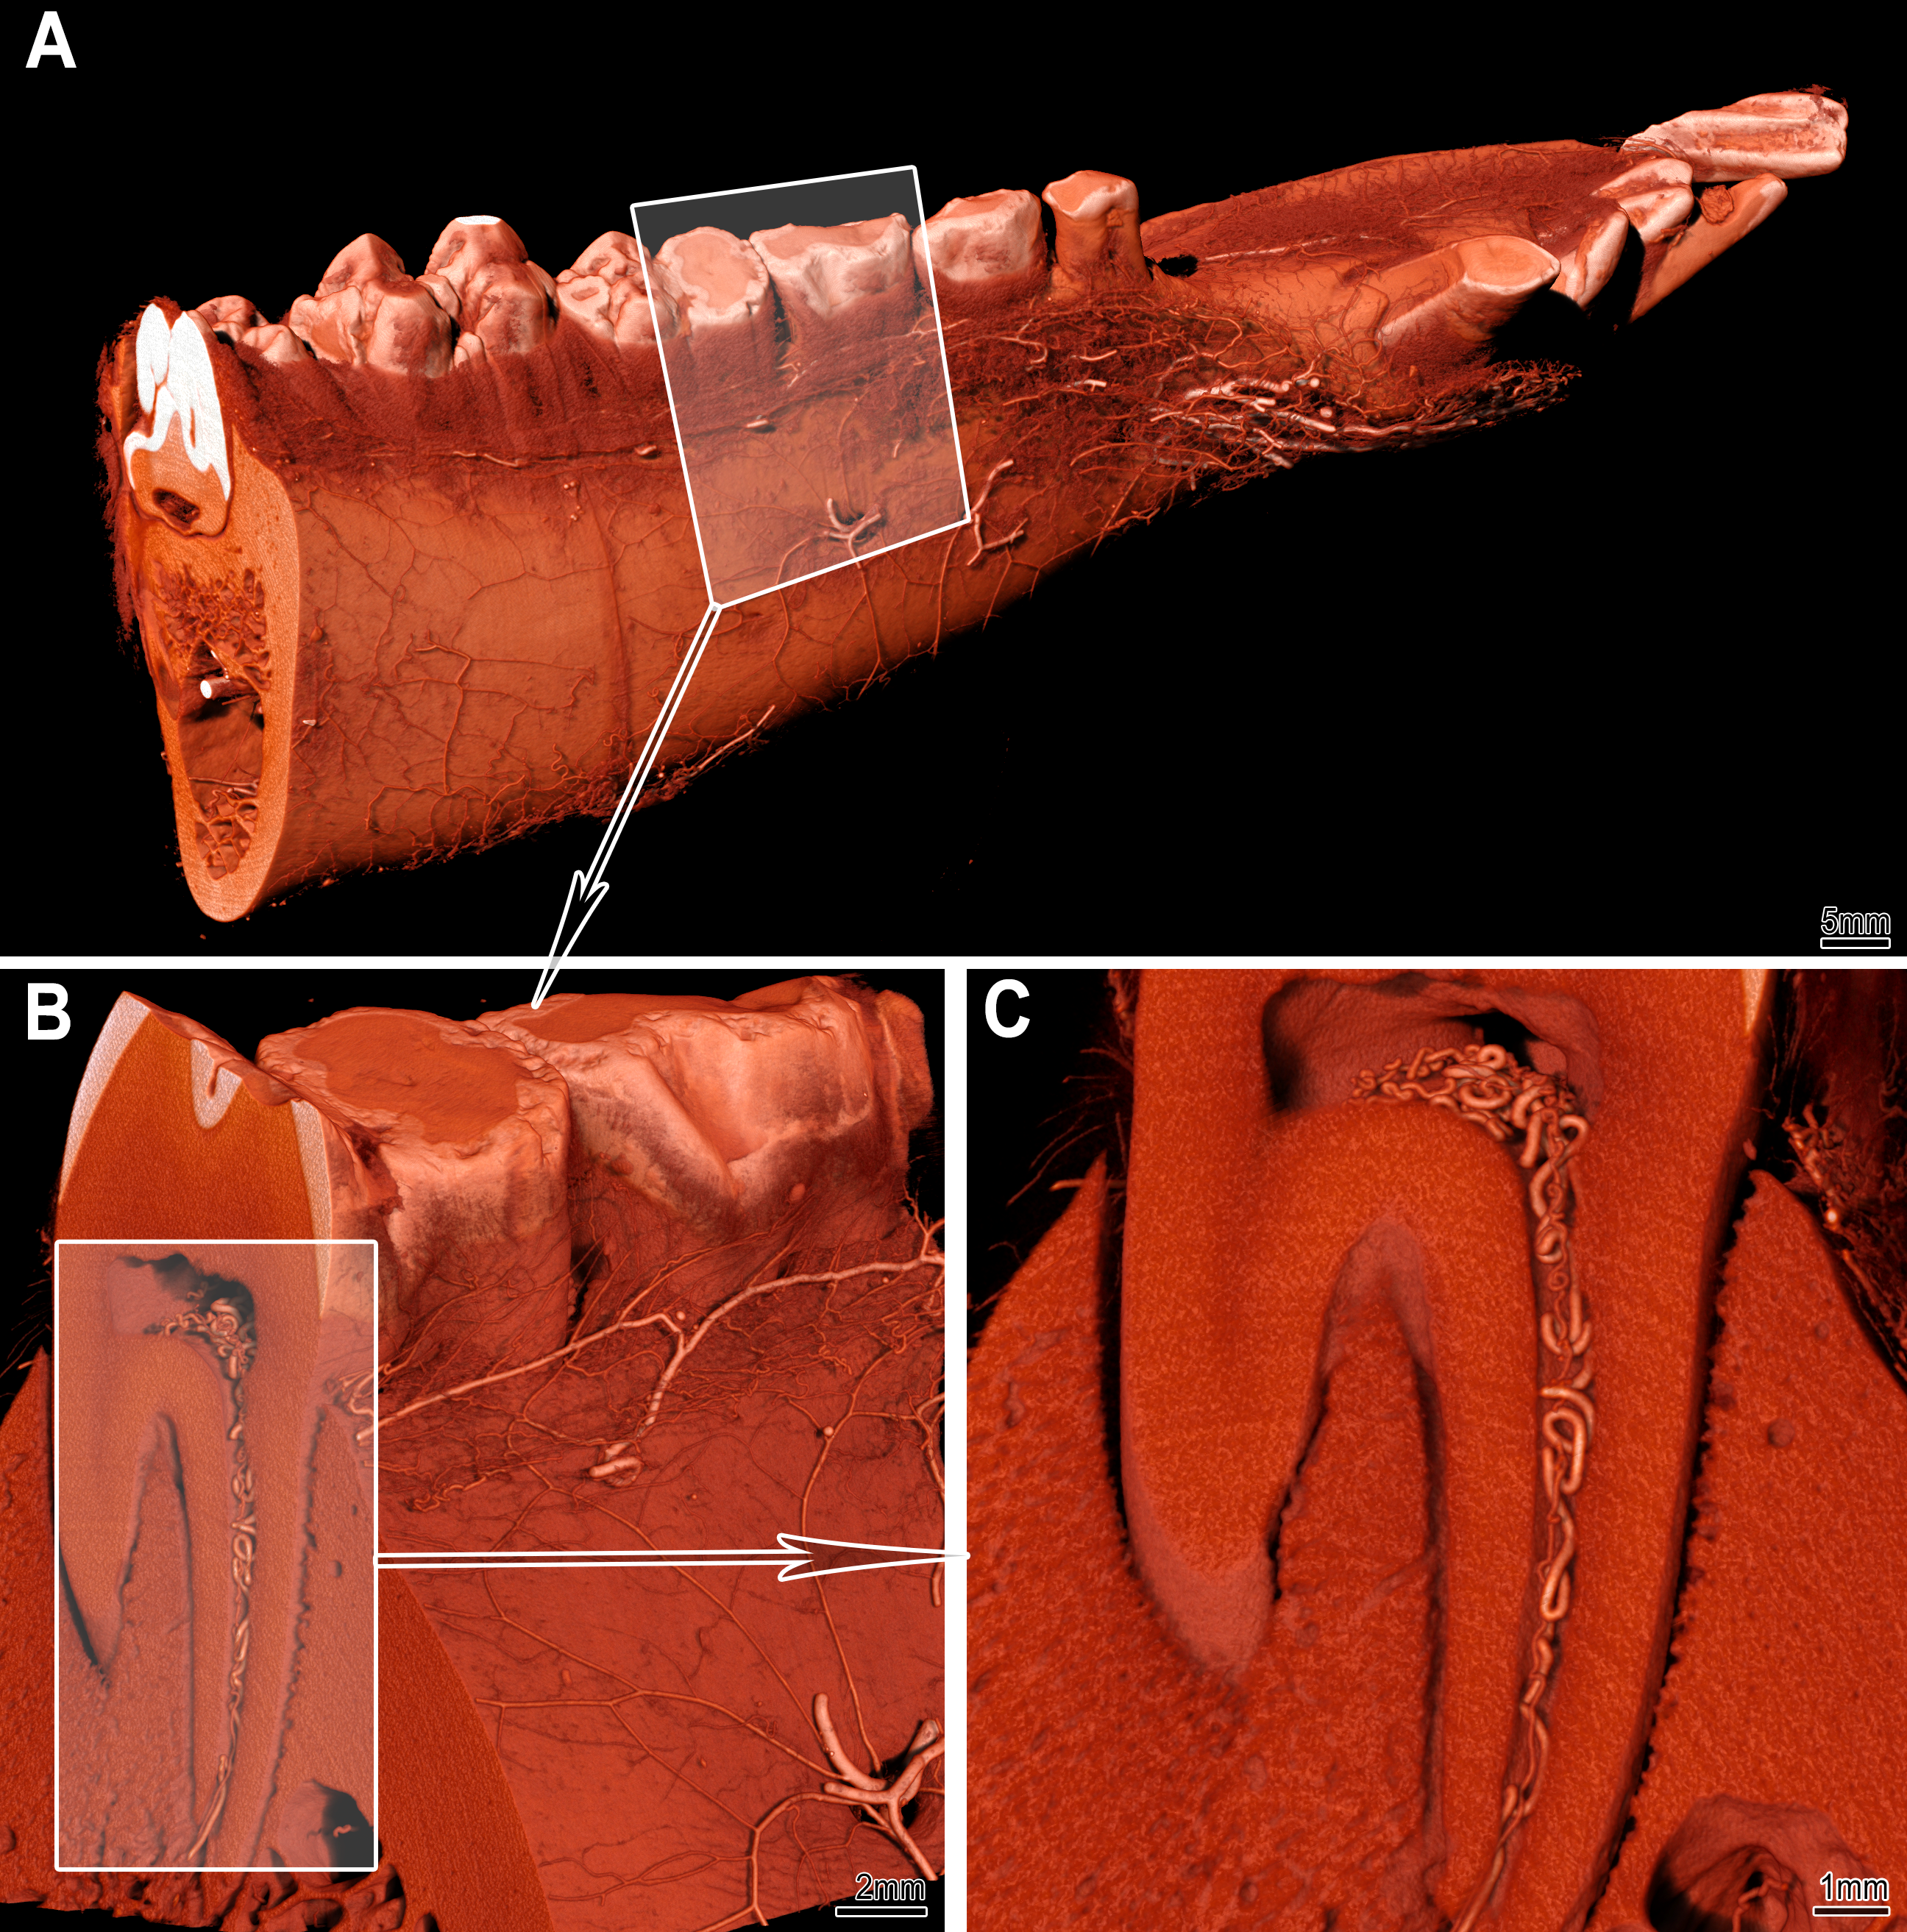 Figure 5: microangioCT of the minipig mandibula. Panel A displays the visualization of a right minipig hemimandible. The vasculature at the bone surface is clearly visible. The framed area in A marks the subvolume represented in panel B at higher magnification. Panel C displays the transverse section marked in panel B: the pulp chamber and root canal with the corresponding vessels are unambiguously visualized. Due to the voxel size of 8–9 µm, microvessels with diameter of 40 µm or less cannot be visualized in such large samples.